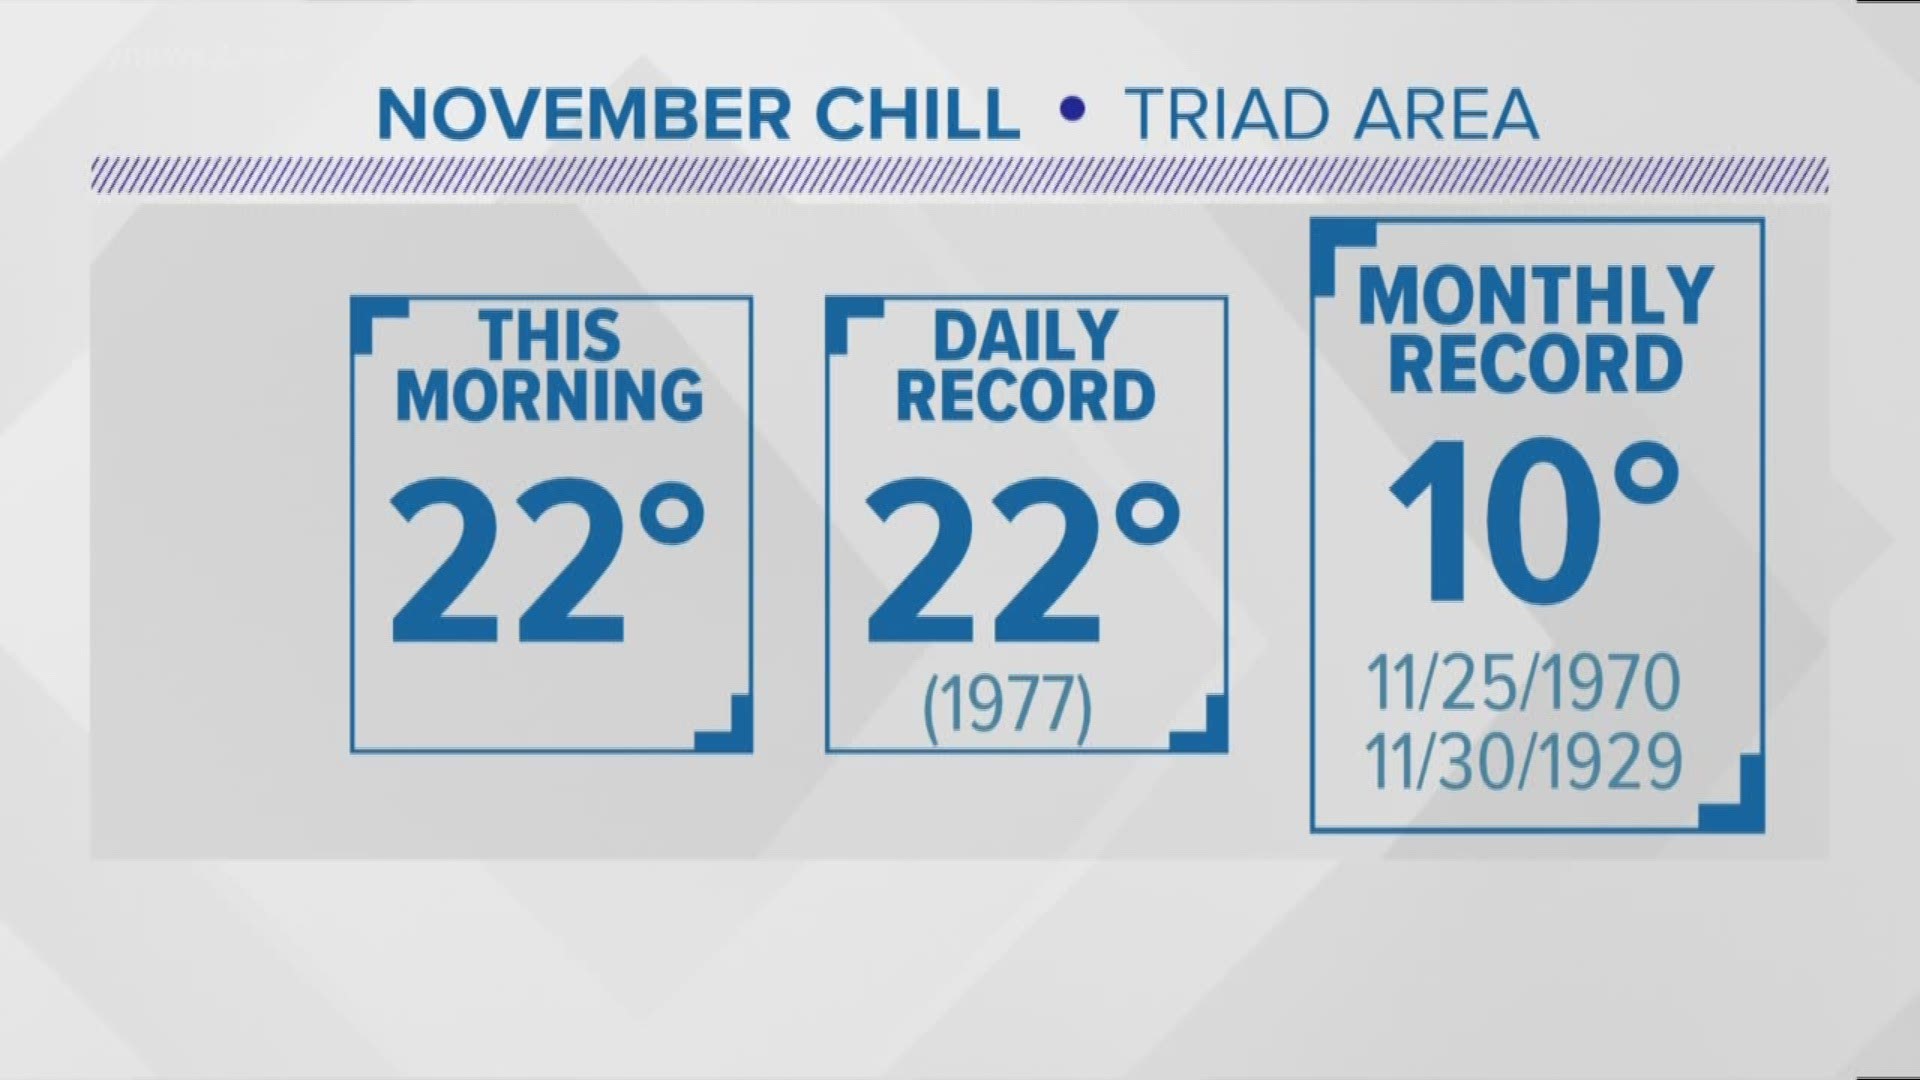 The upper-20 high temperature was unseasonably cold for November 13 in the Triad, but it did not break the month’s record.